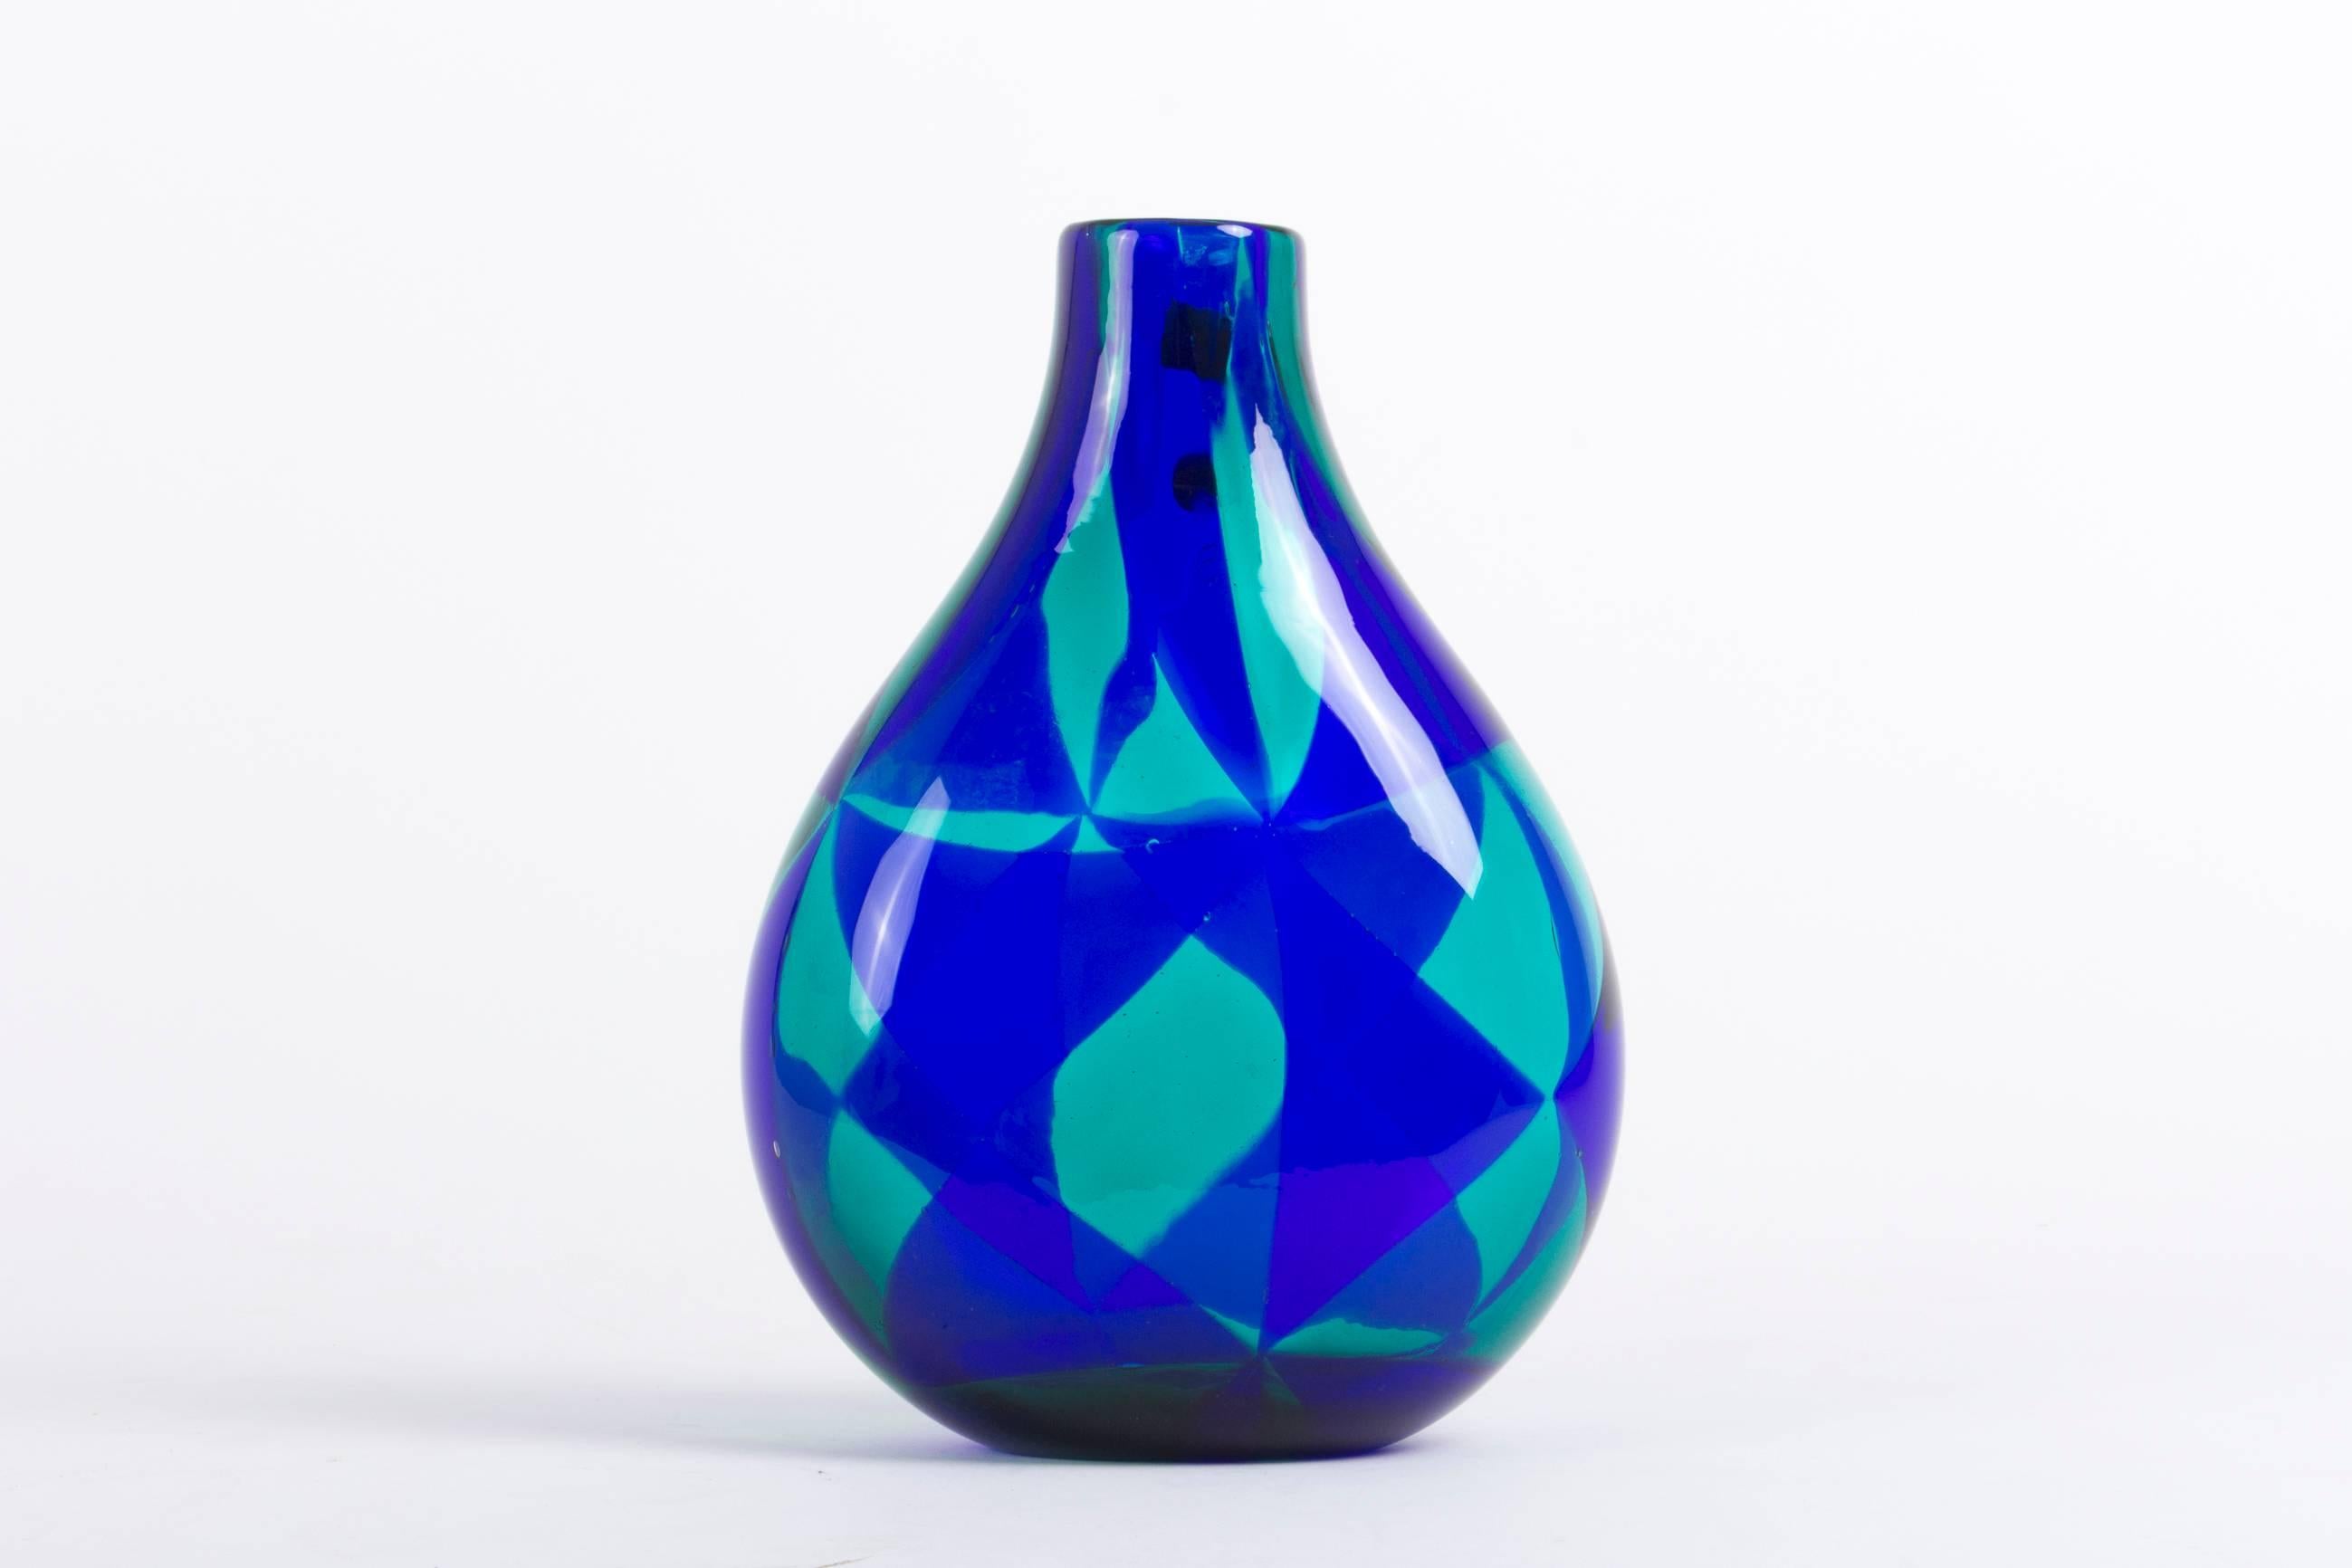 Mid-Century Modern Large 'Intarsio' Murano Vase by Enrcole Barovier for Barovier & Toso, 1960s